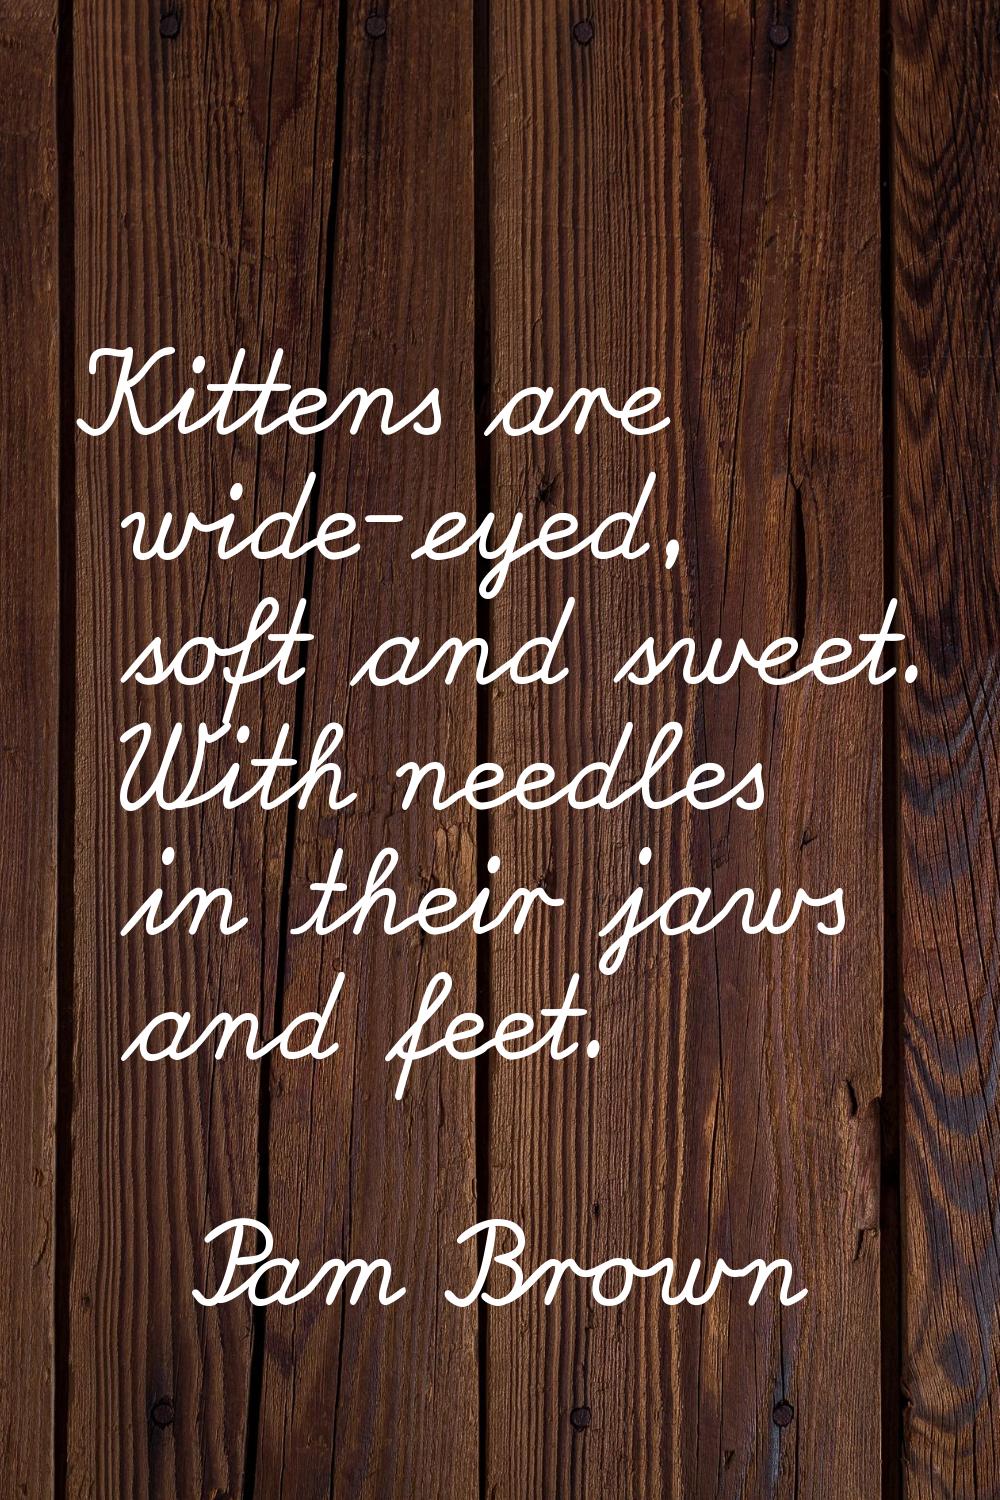 Kittens are wide-eyed, soft and sweet. With needles in their jaws and feet.